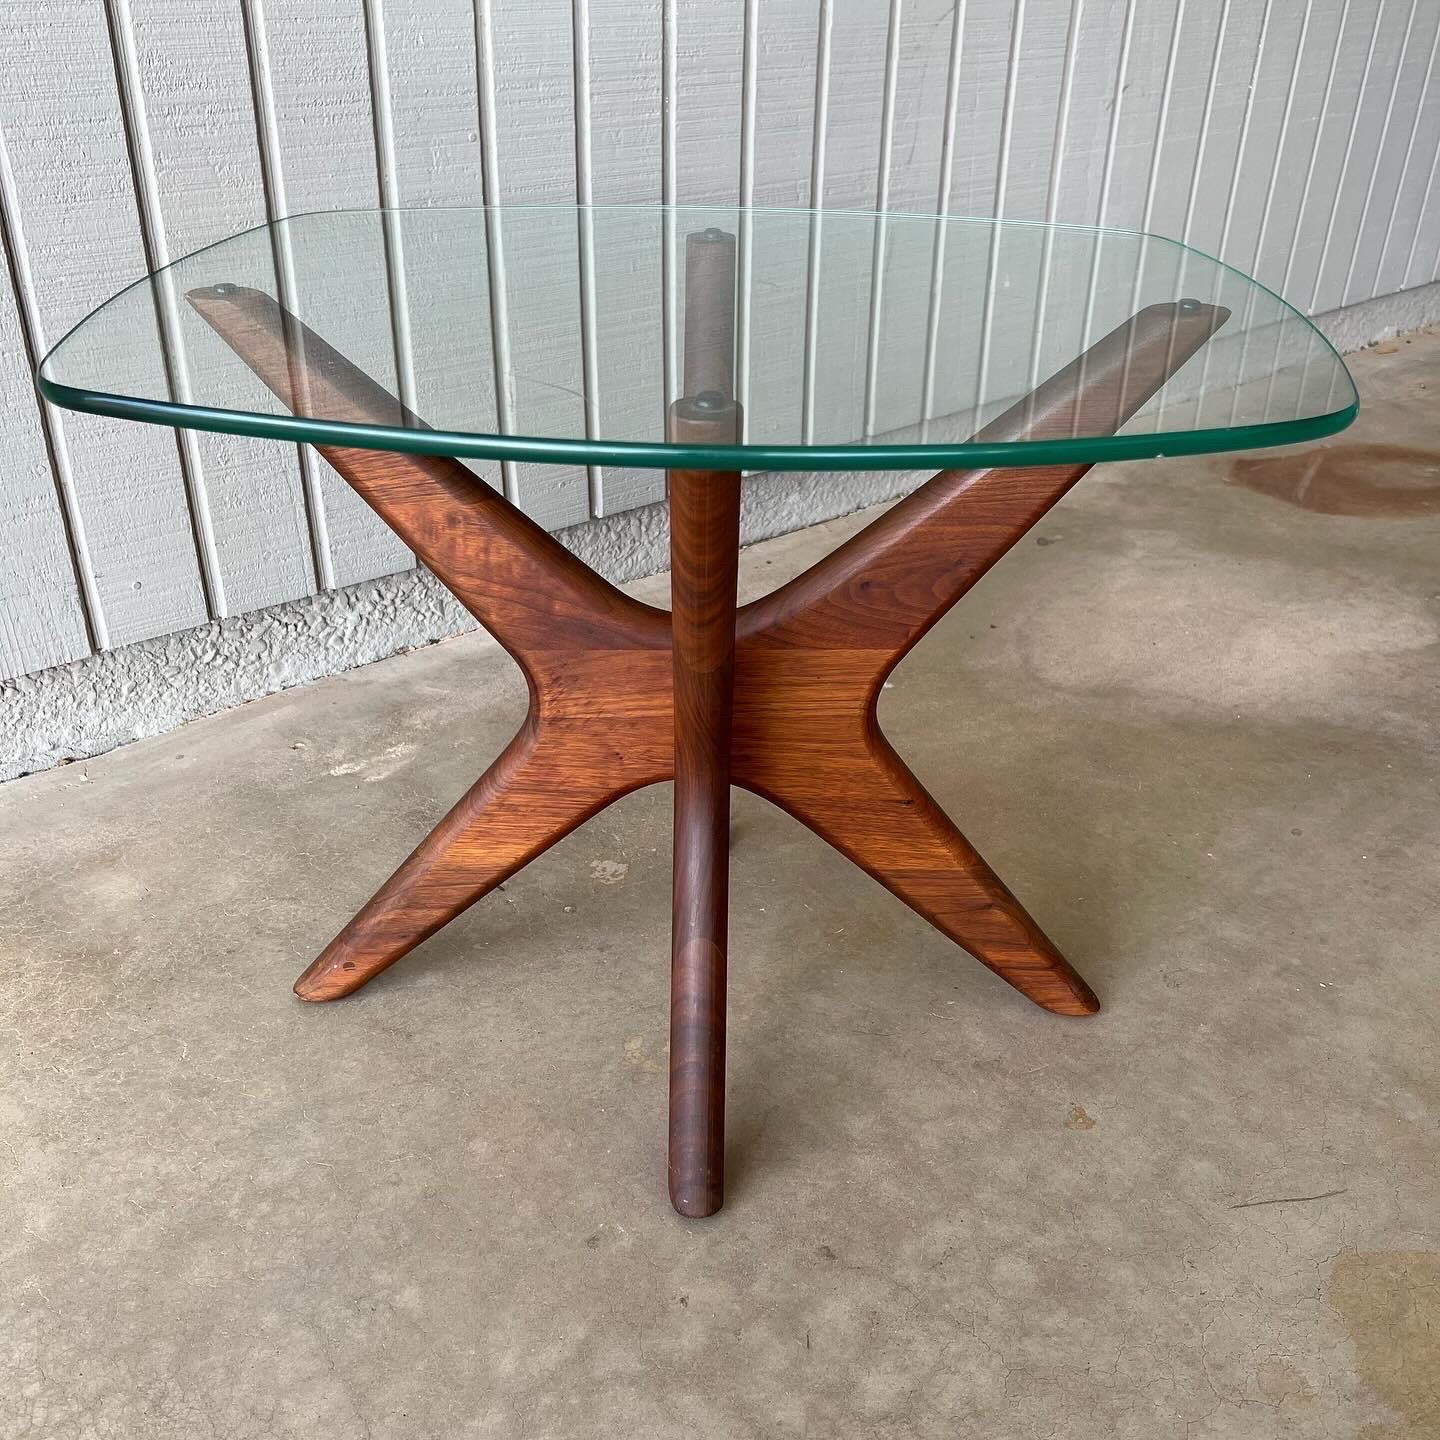 Adrian Pearsall for Craft Associates “Jacks” or “Jax” sculptural walnut and glass end or side table, model 1618-TE, 1960s, PA, USA. A vintage mid century modern classic. The original glass top is in great vintage condition with minimal surface